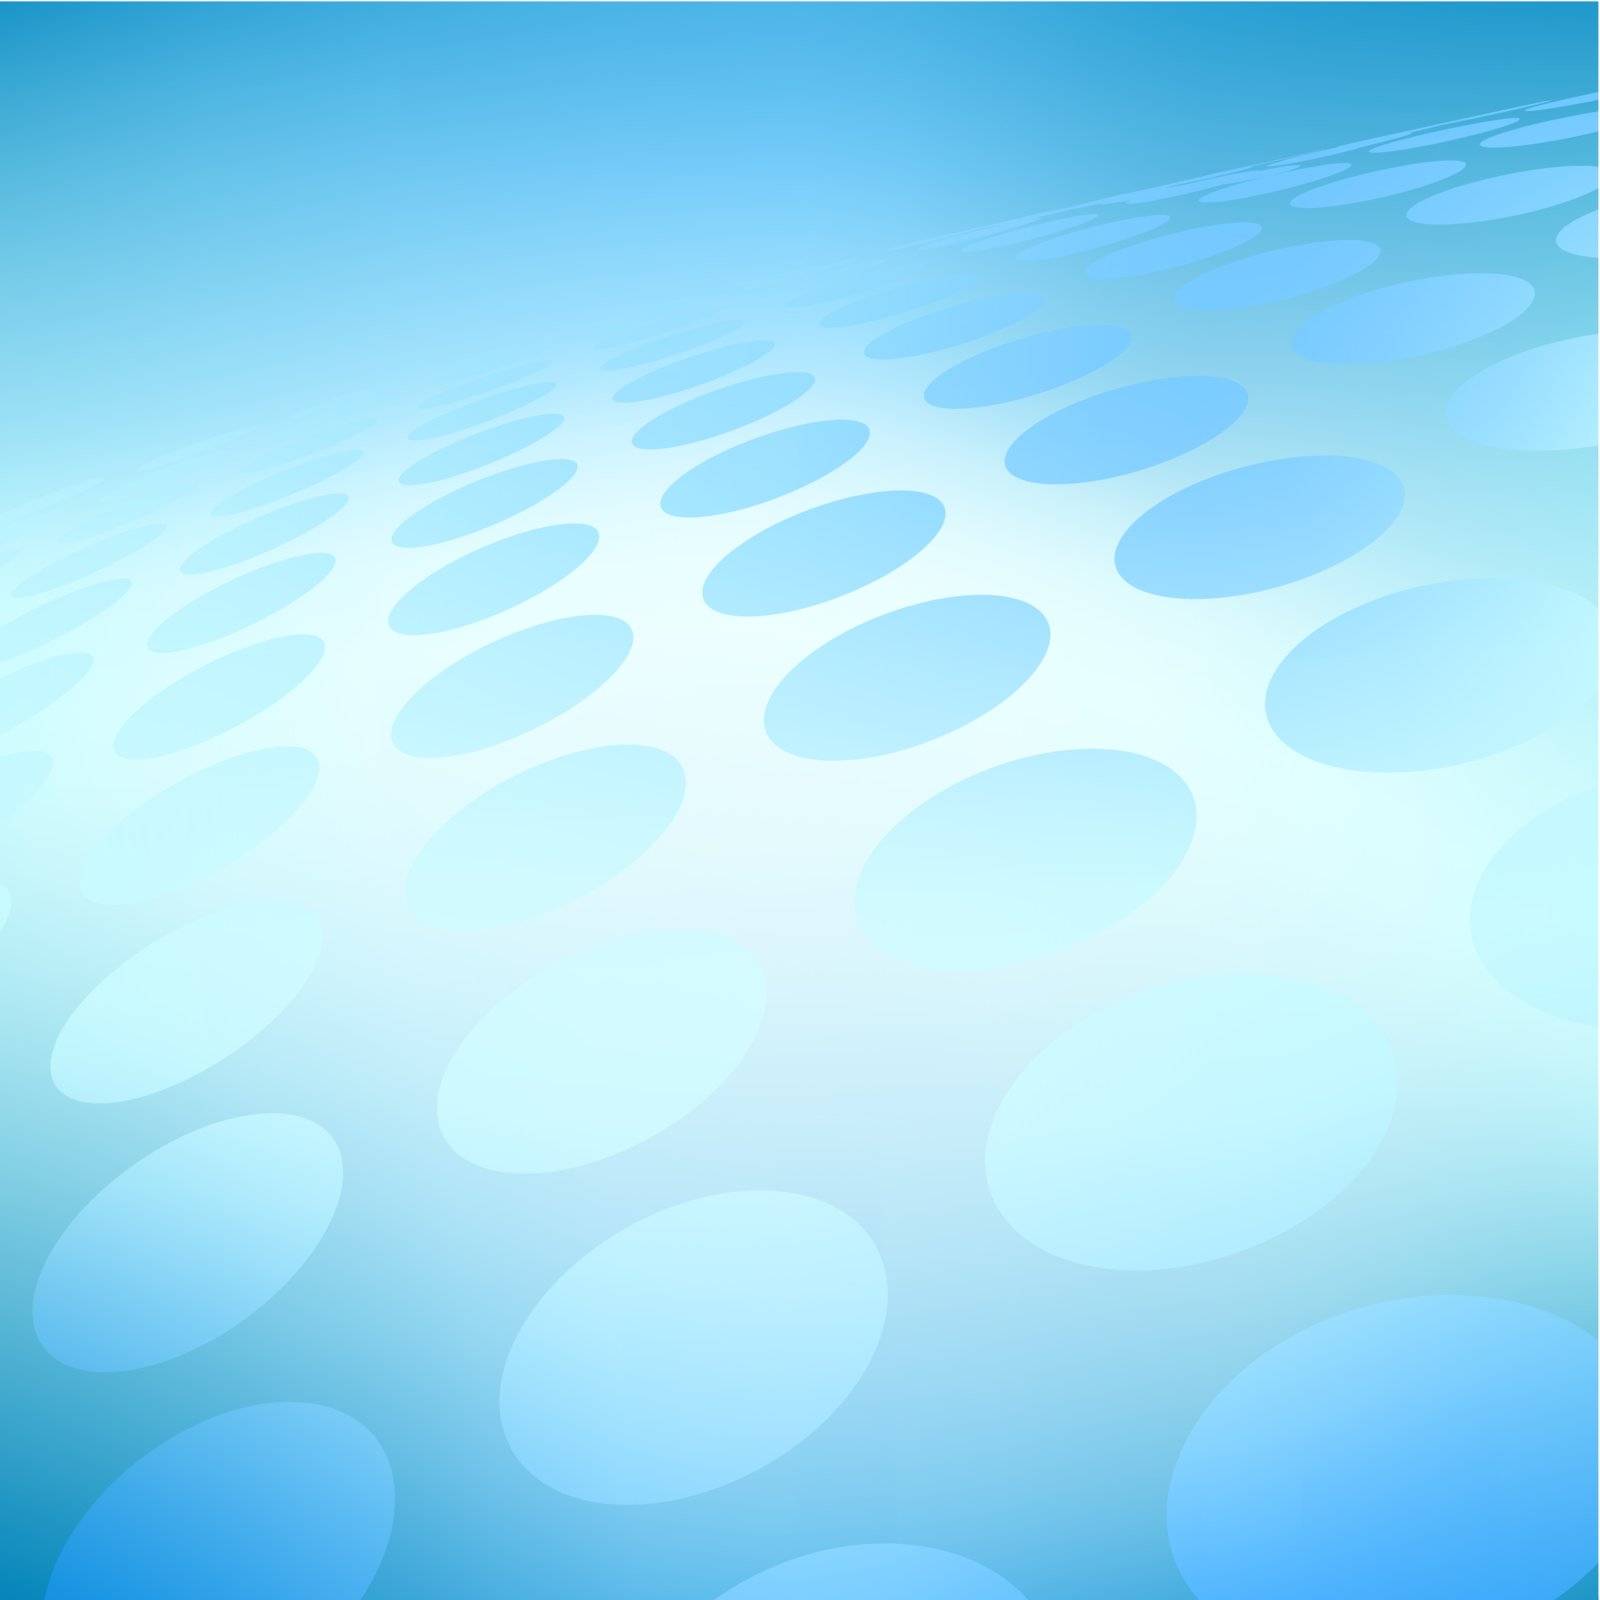 Abstract editable vector illustration of a blue halftone pattern